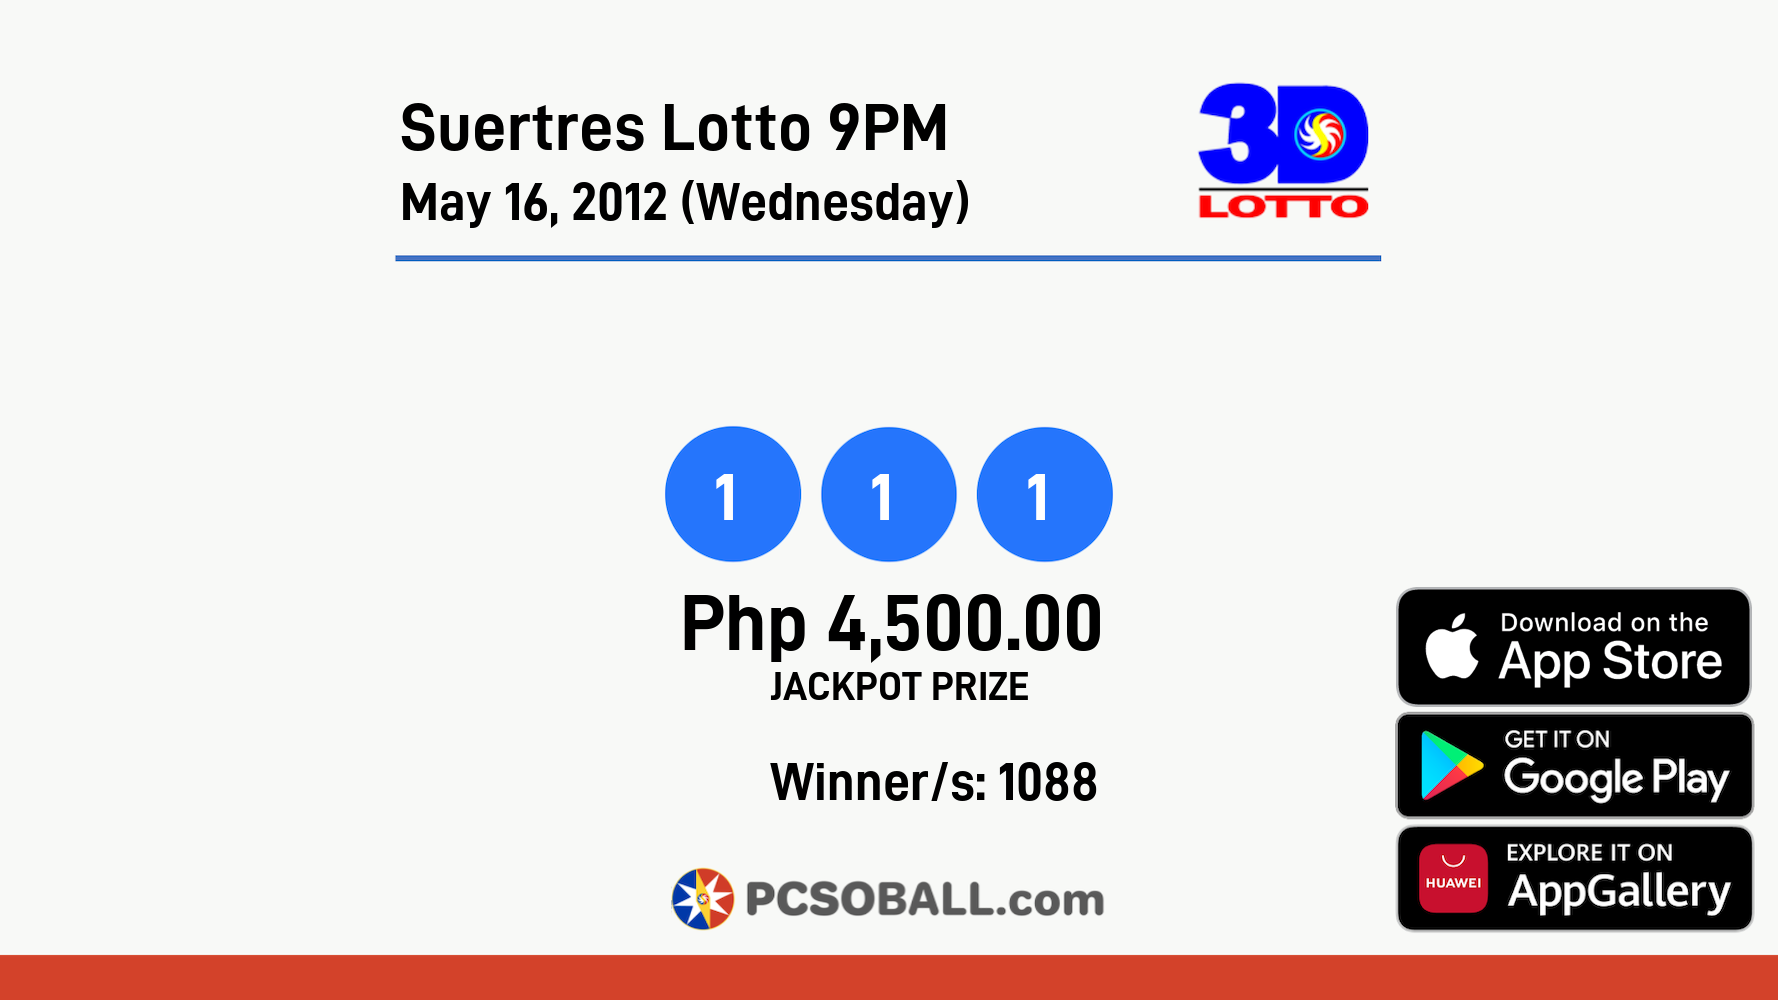 Suertres Lotto 9PM May 16, 2012 (Wednesday) Result